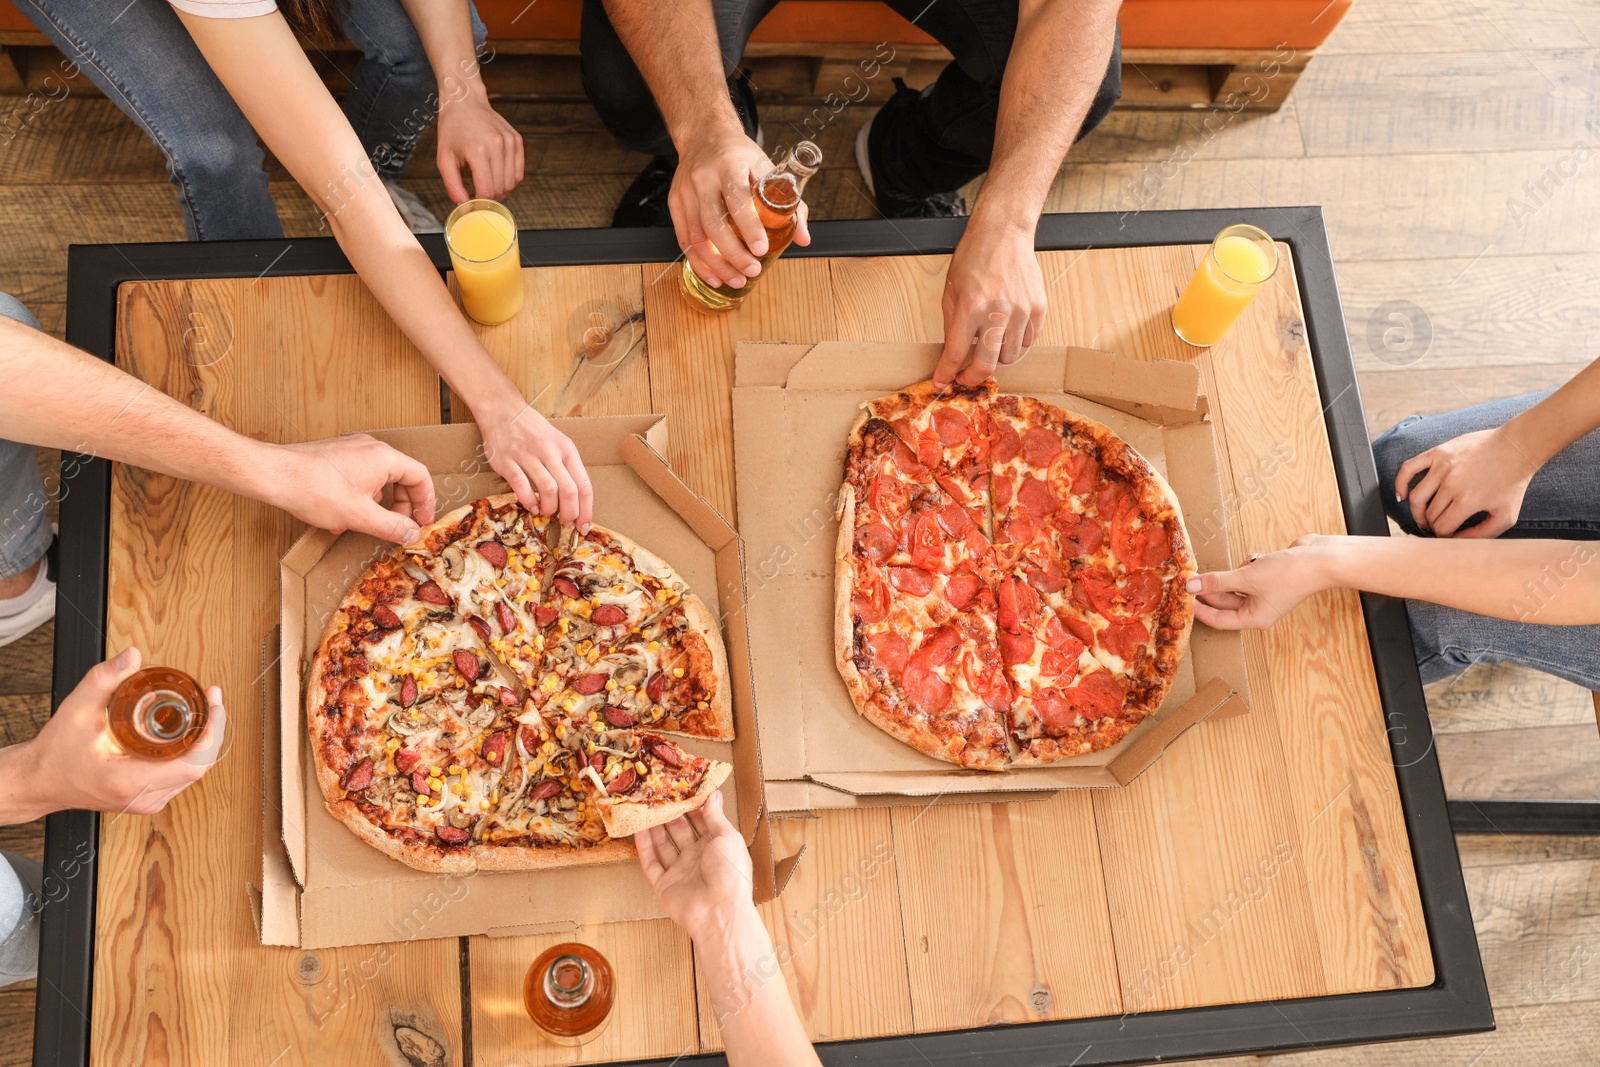 Photo of Young people eating delicious pizza at table, top view